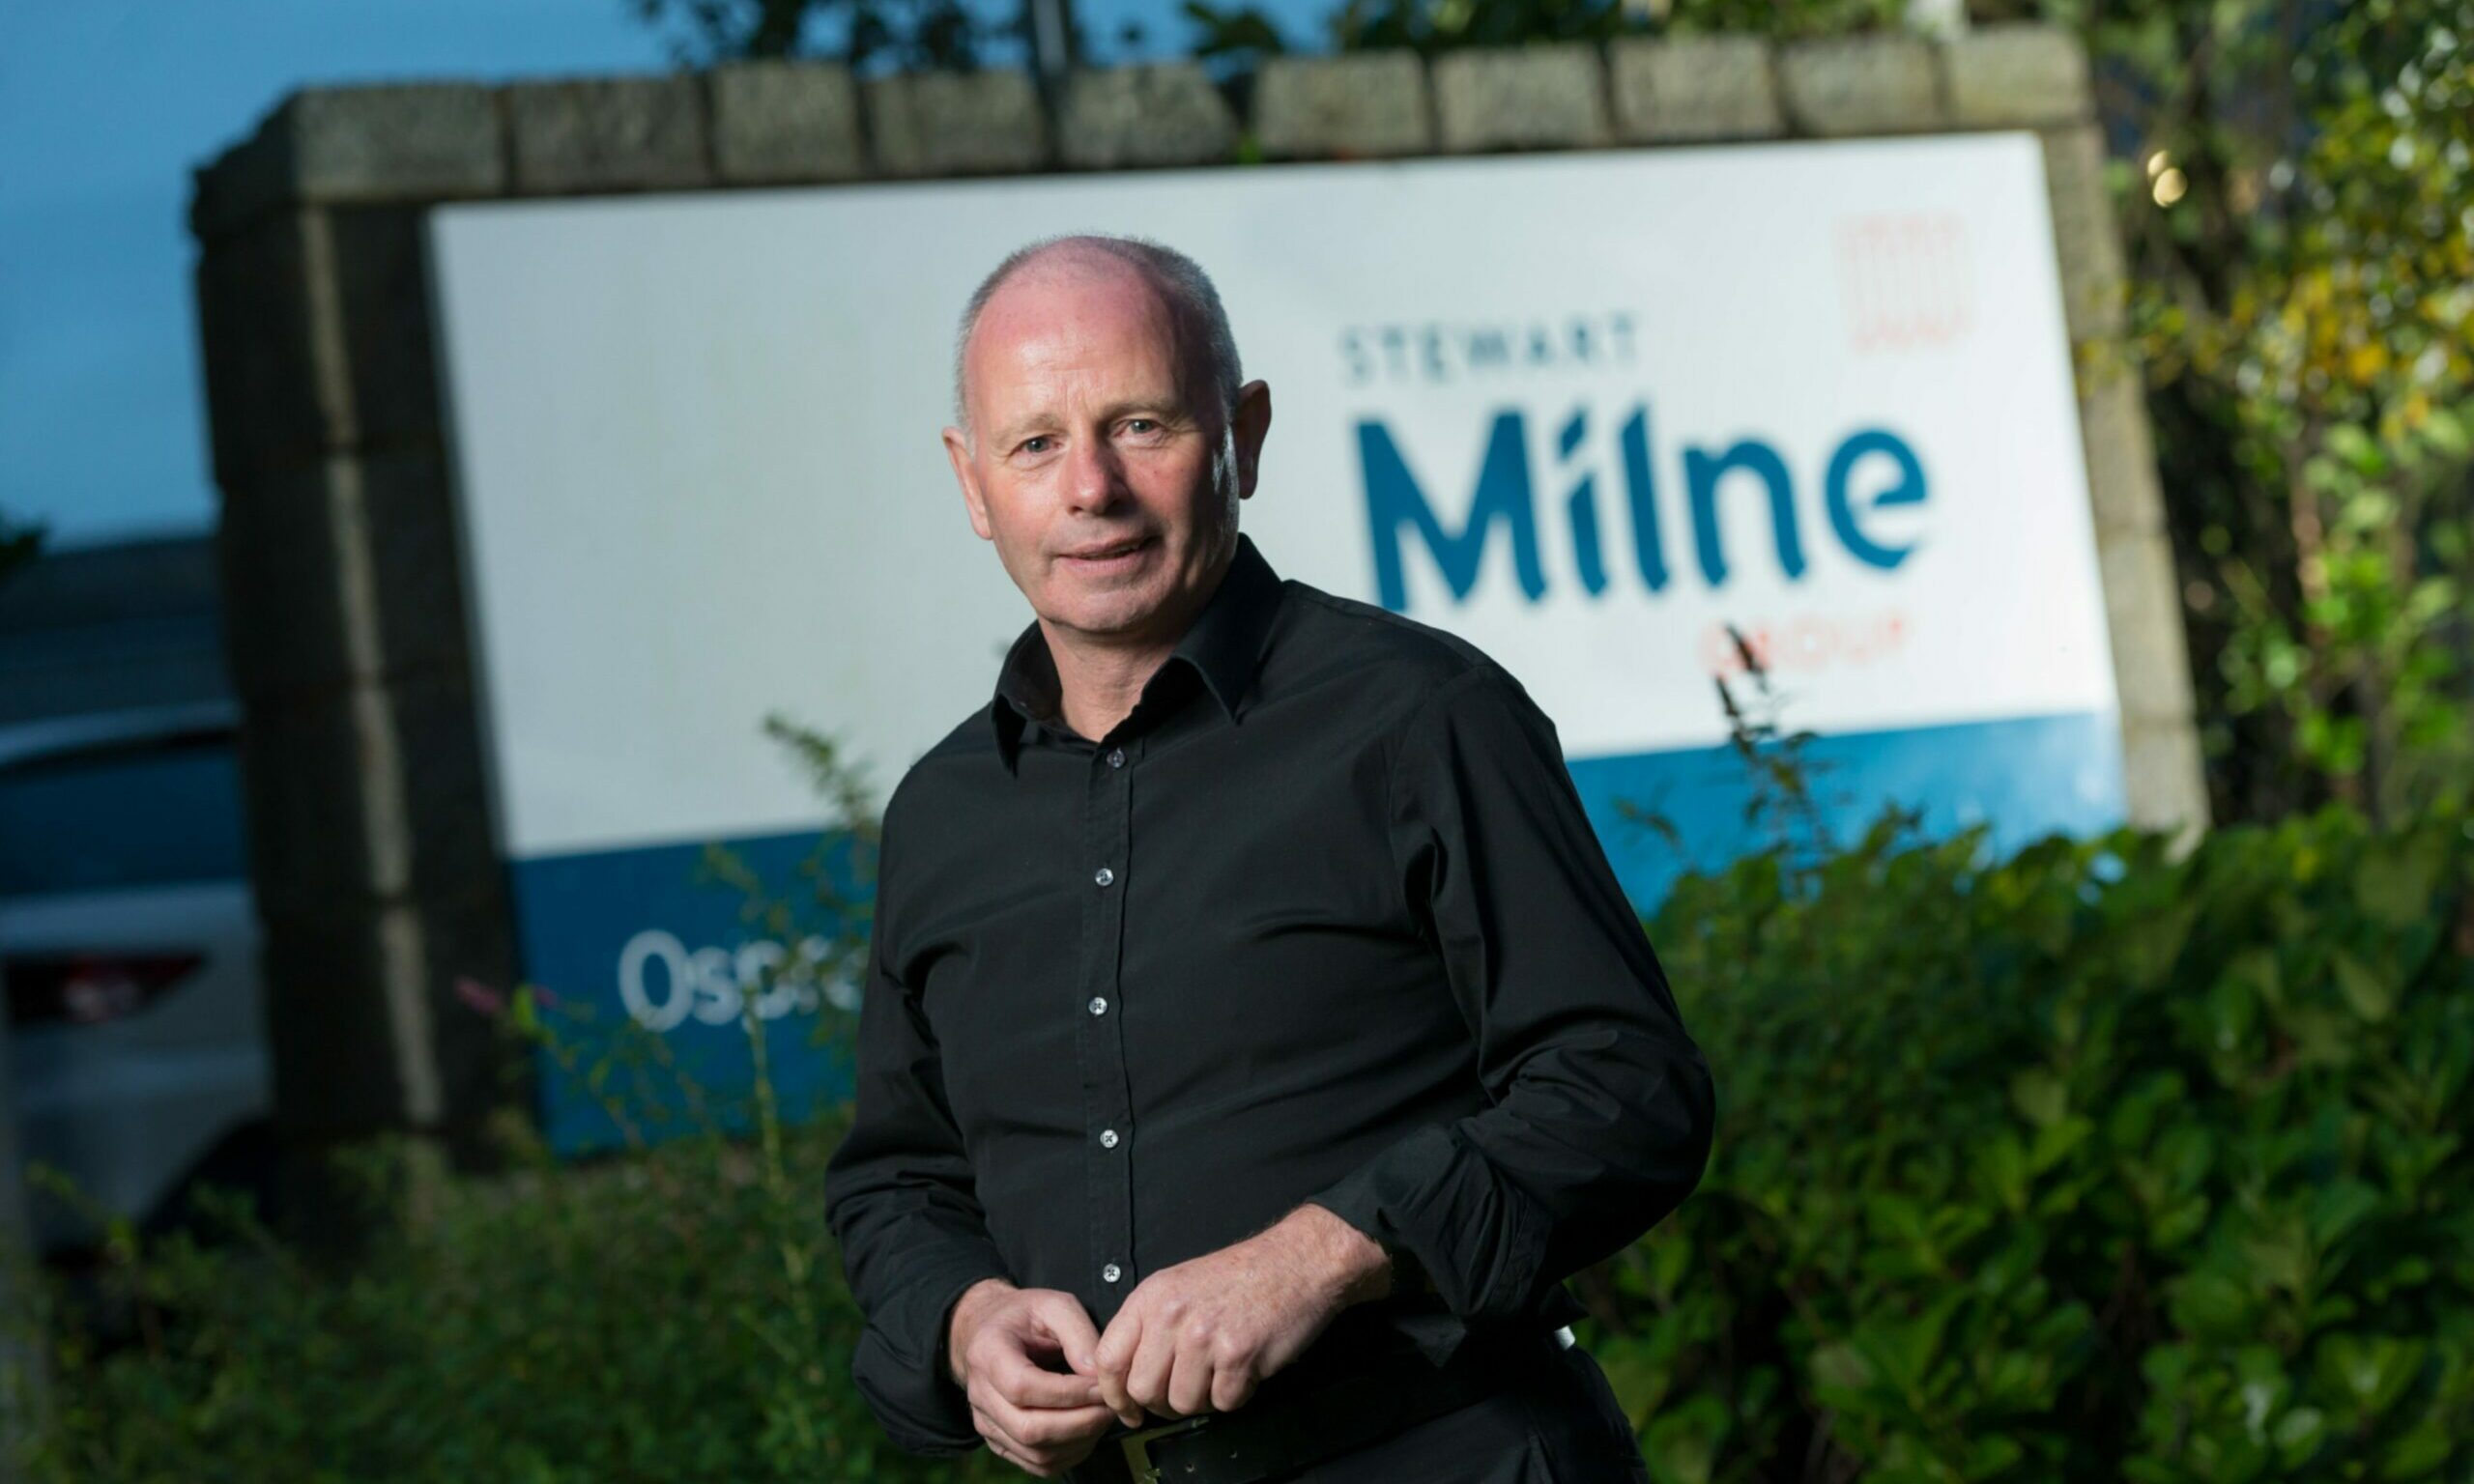 North-east housebuilding tycoon Stewart Milne has drawn down the curtain on his business life.